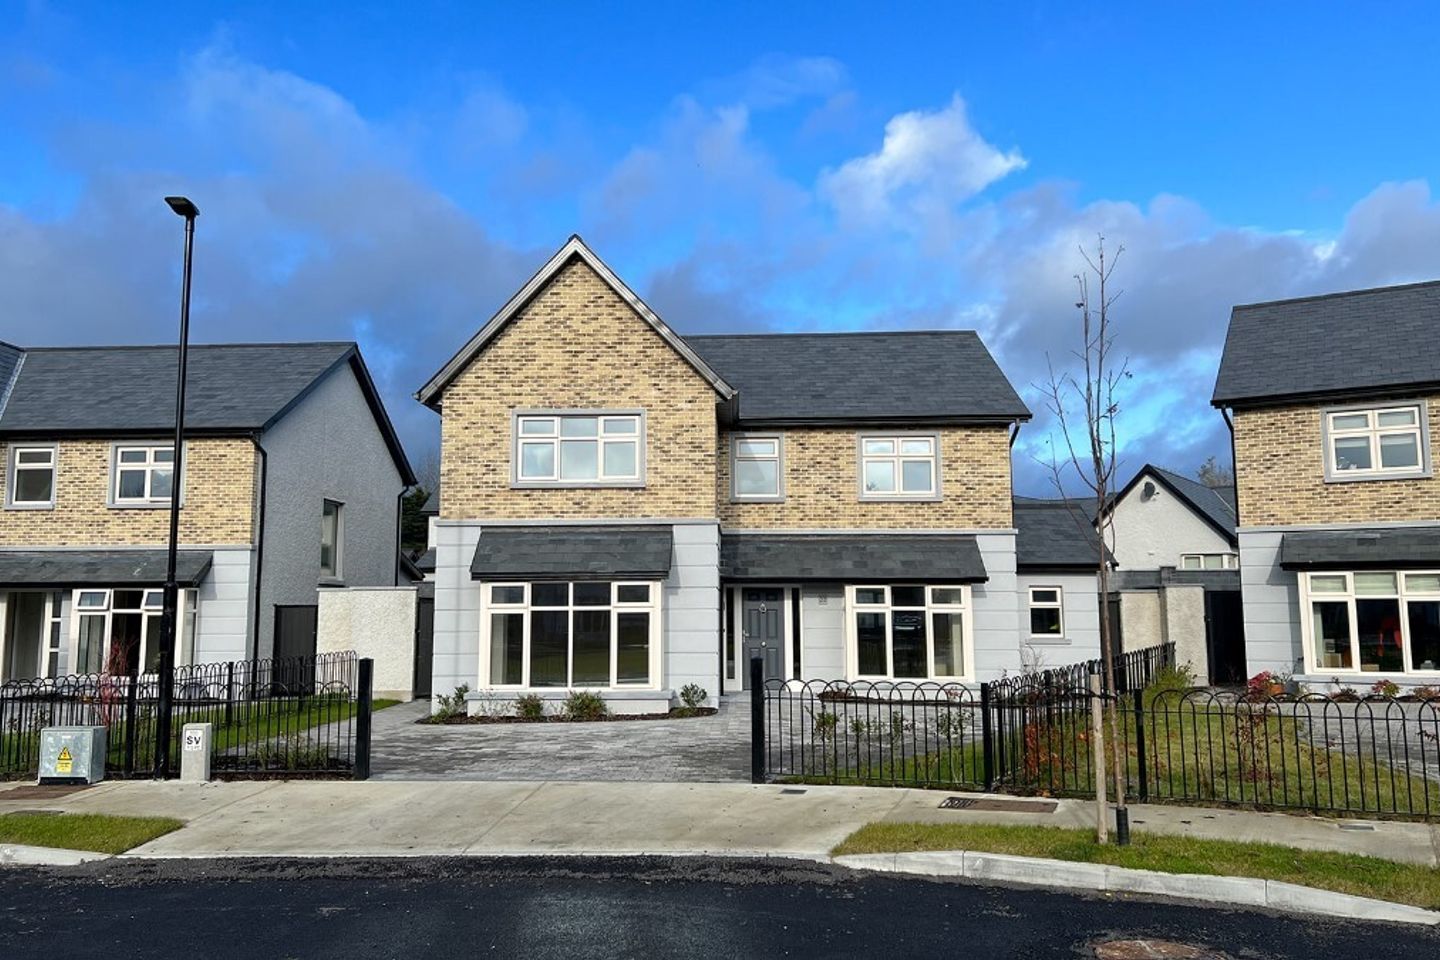 22 Long Meadows, Old Sion Road, Kilkenny, Co. Kilkenny, R95VY8D